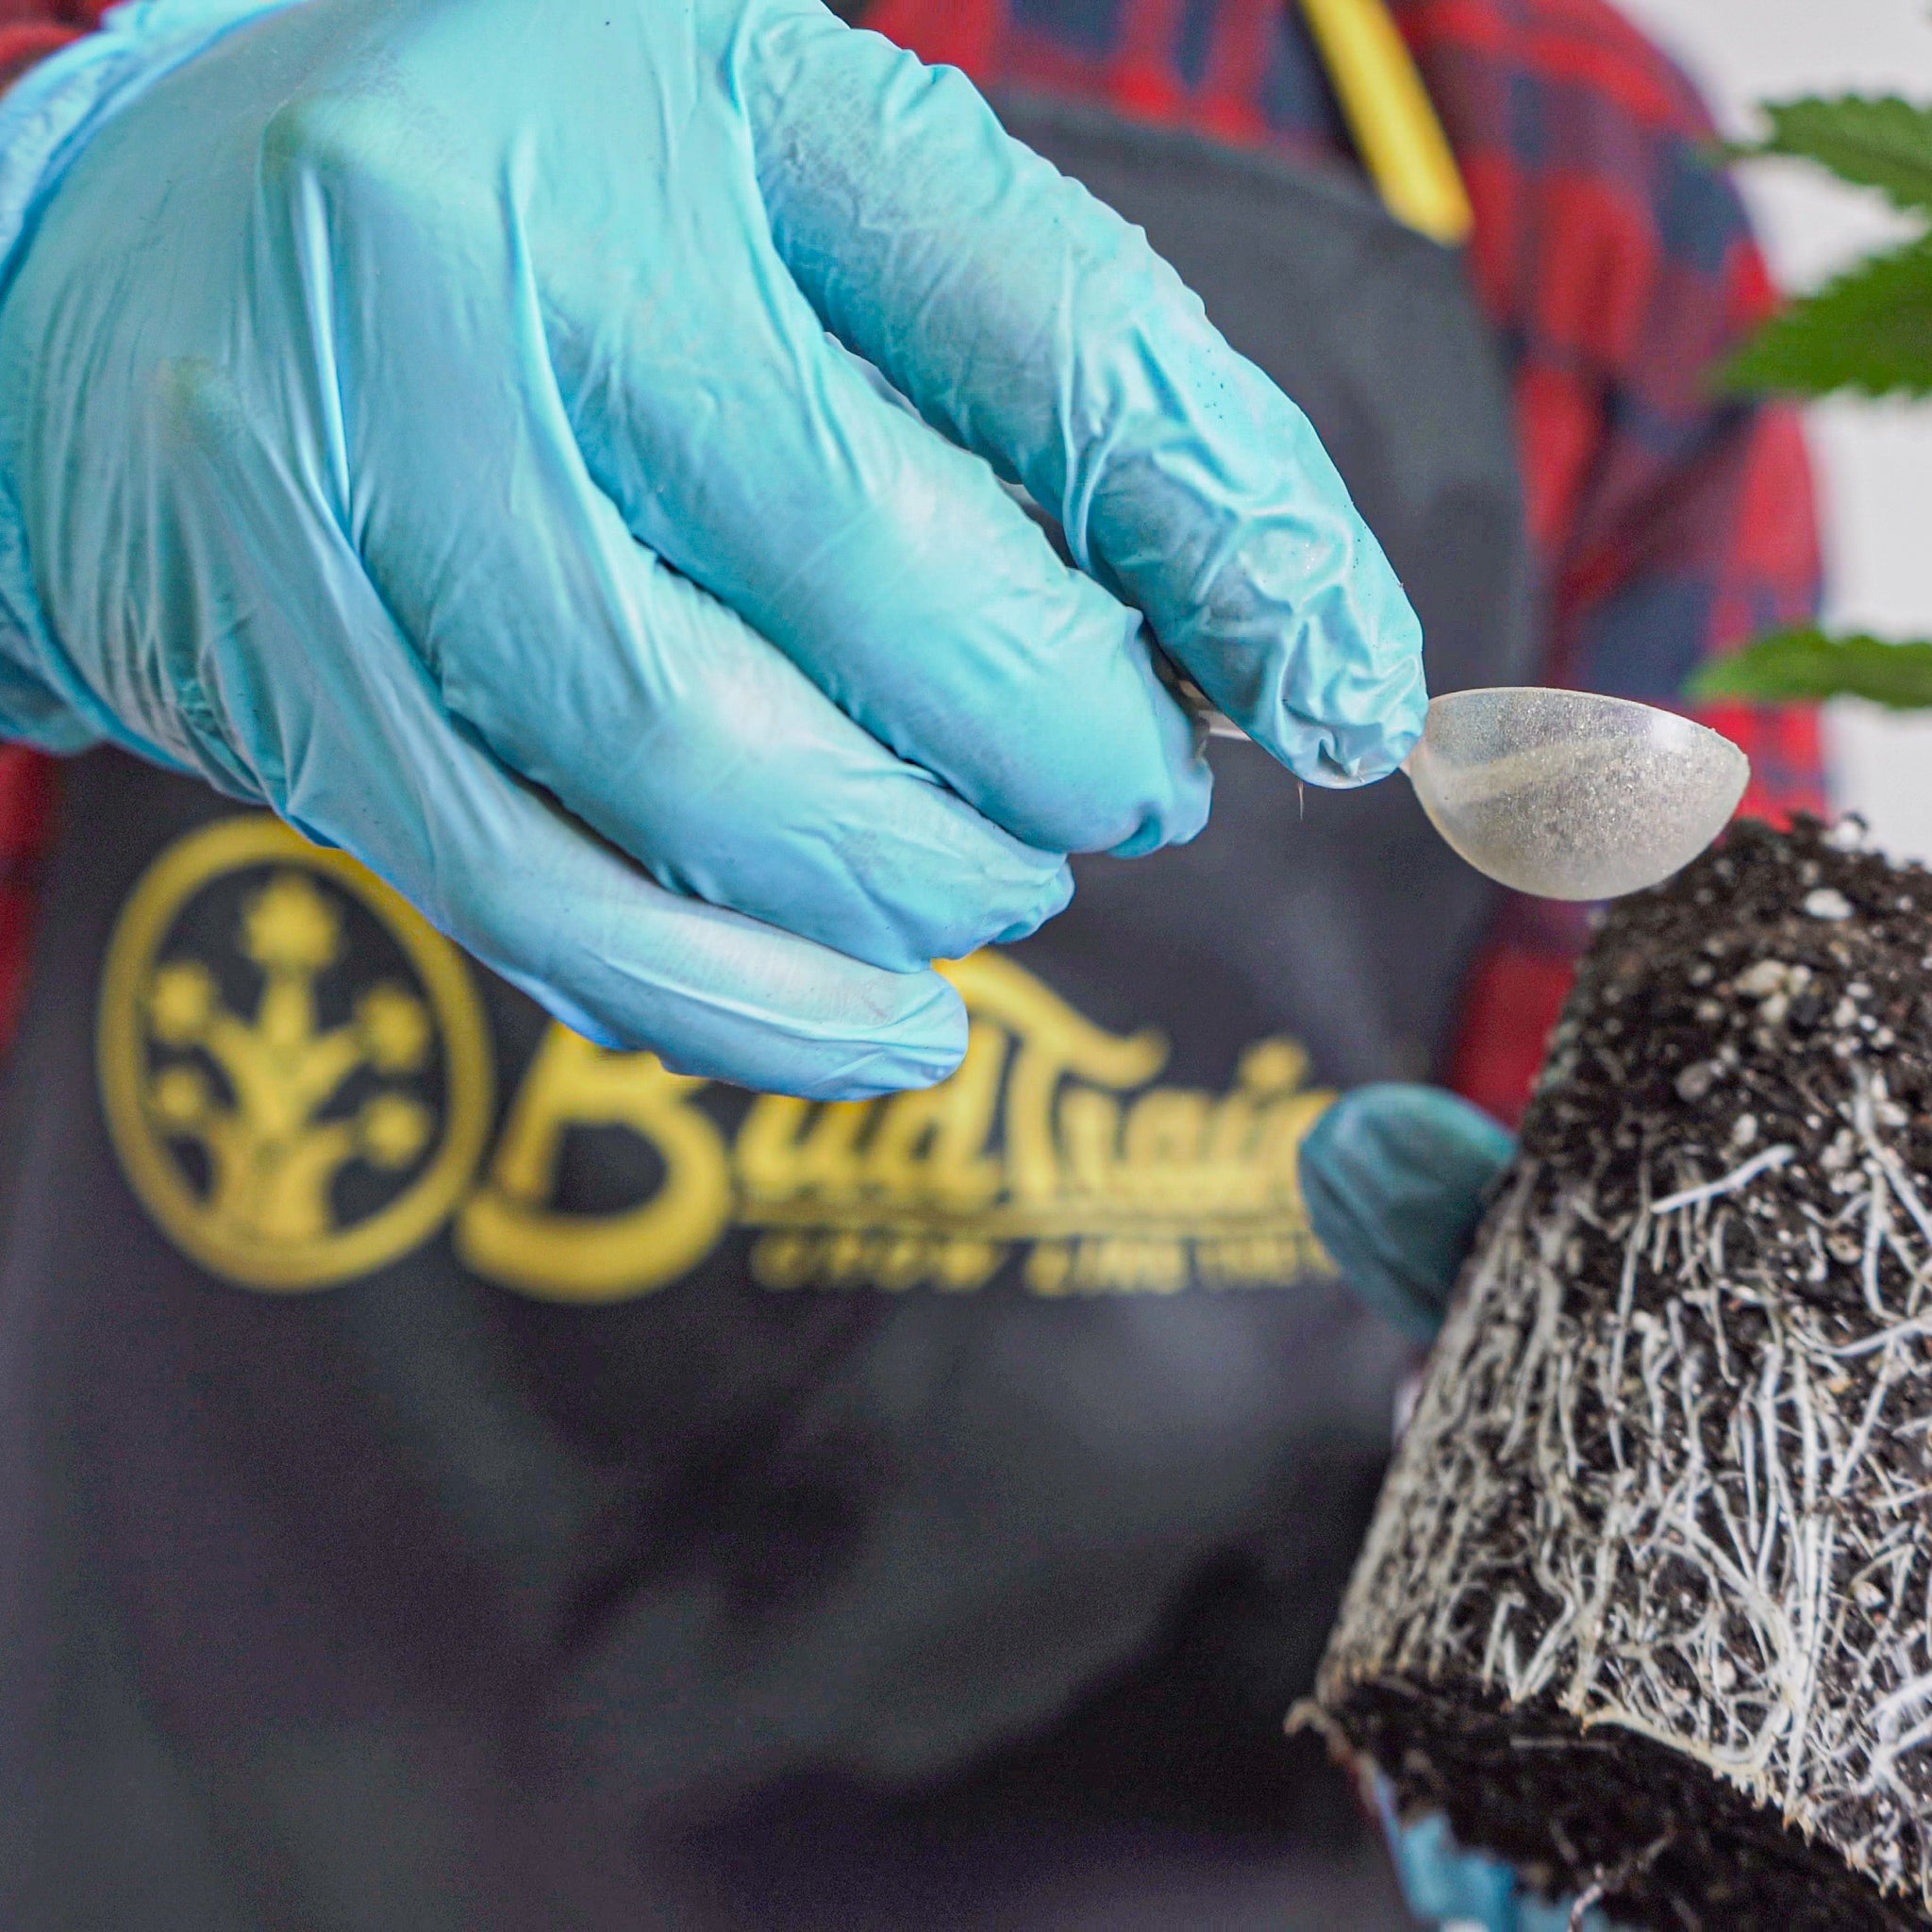 Close-up image showing a person in blue gloves holding a transparent spoon with a nutrient supplement over a young cannabis plant's root system, which has been removed from a BudCups container. The person is wearing a BudPots apron with a gold logo, visible in the background along with a healthy cannabis plant.